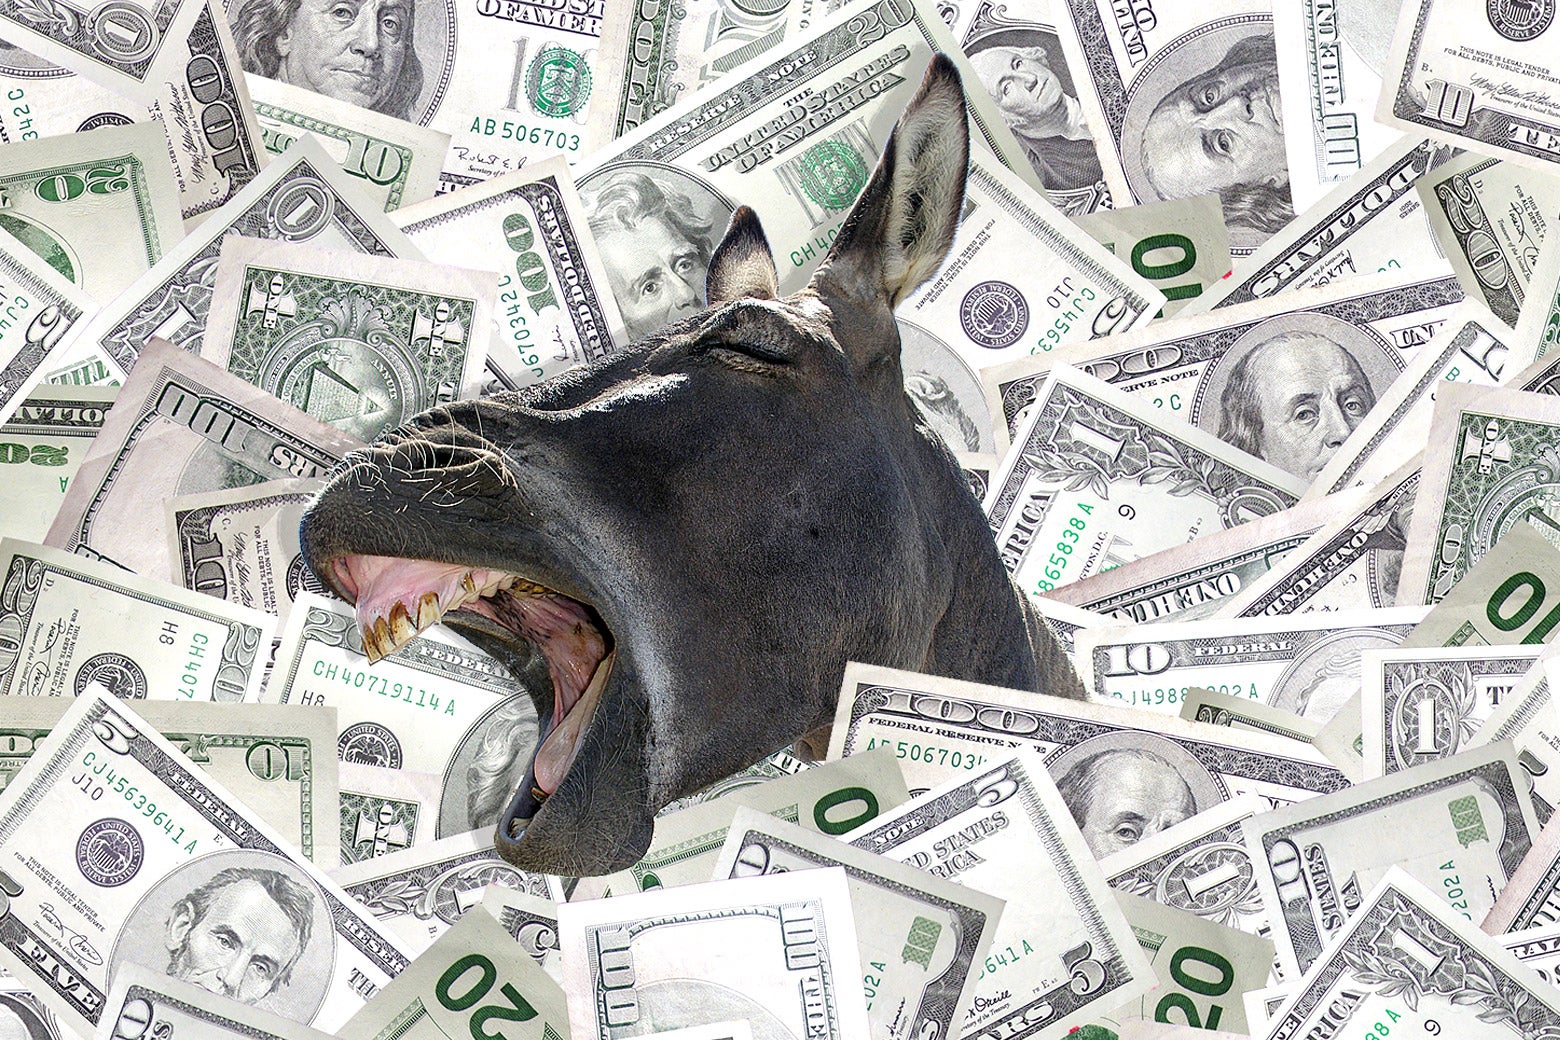 A photo illustration of a donkey, representing the Democrats, surrounded by dollar bills.